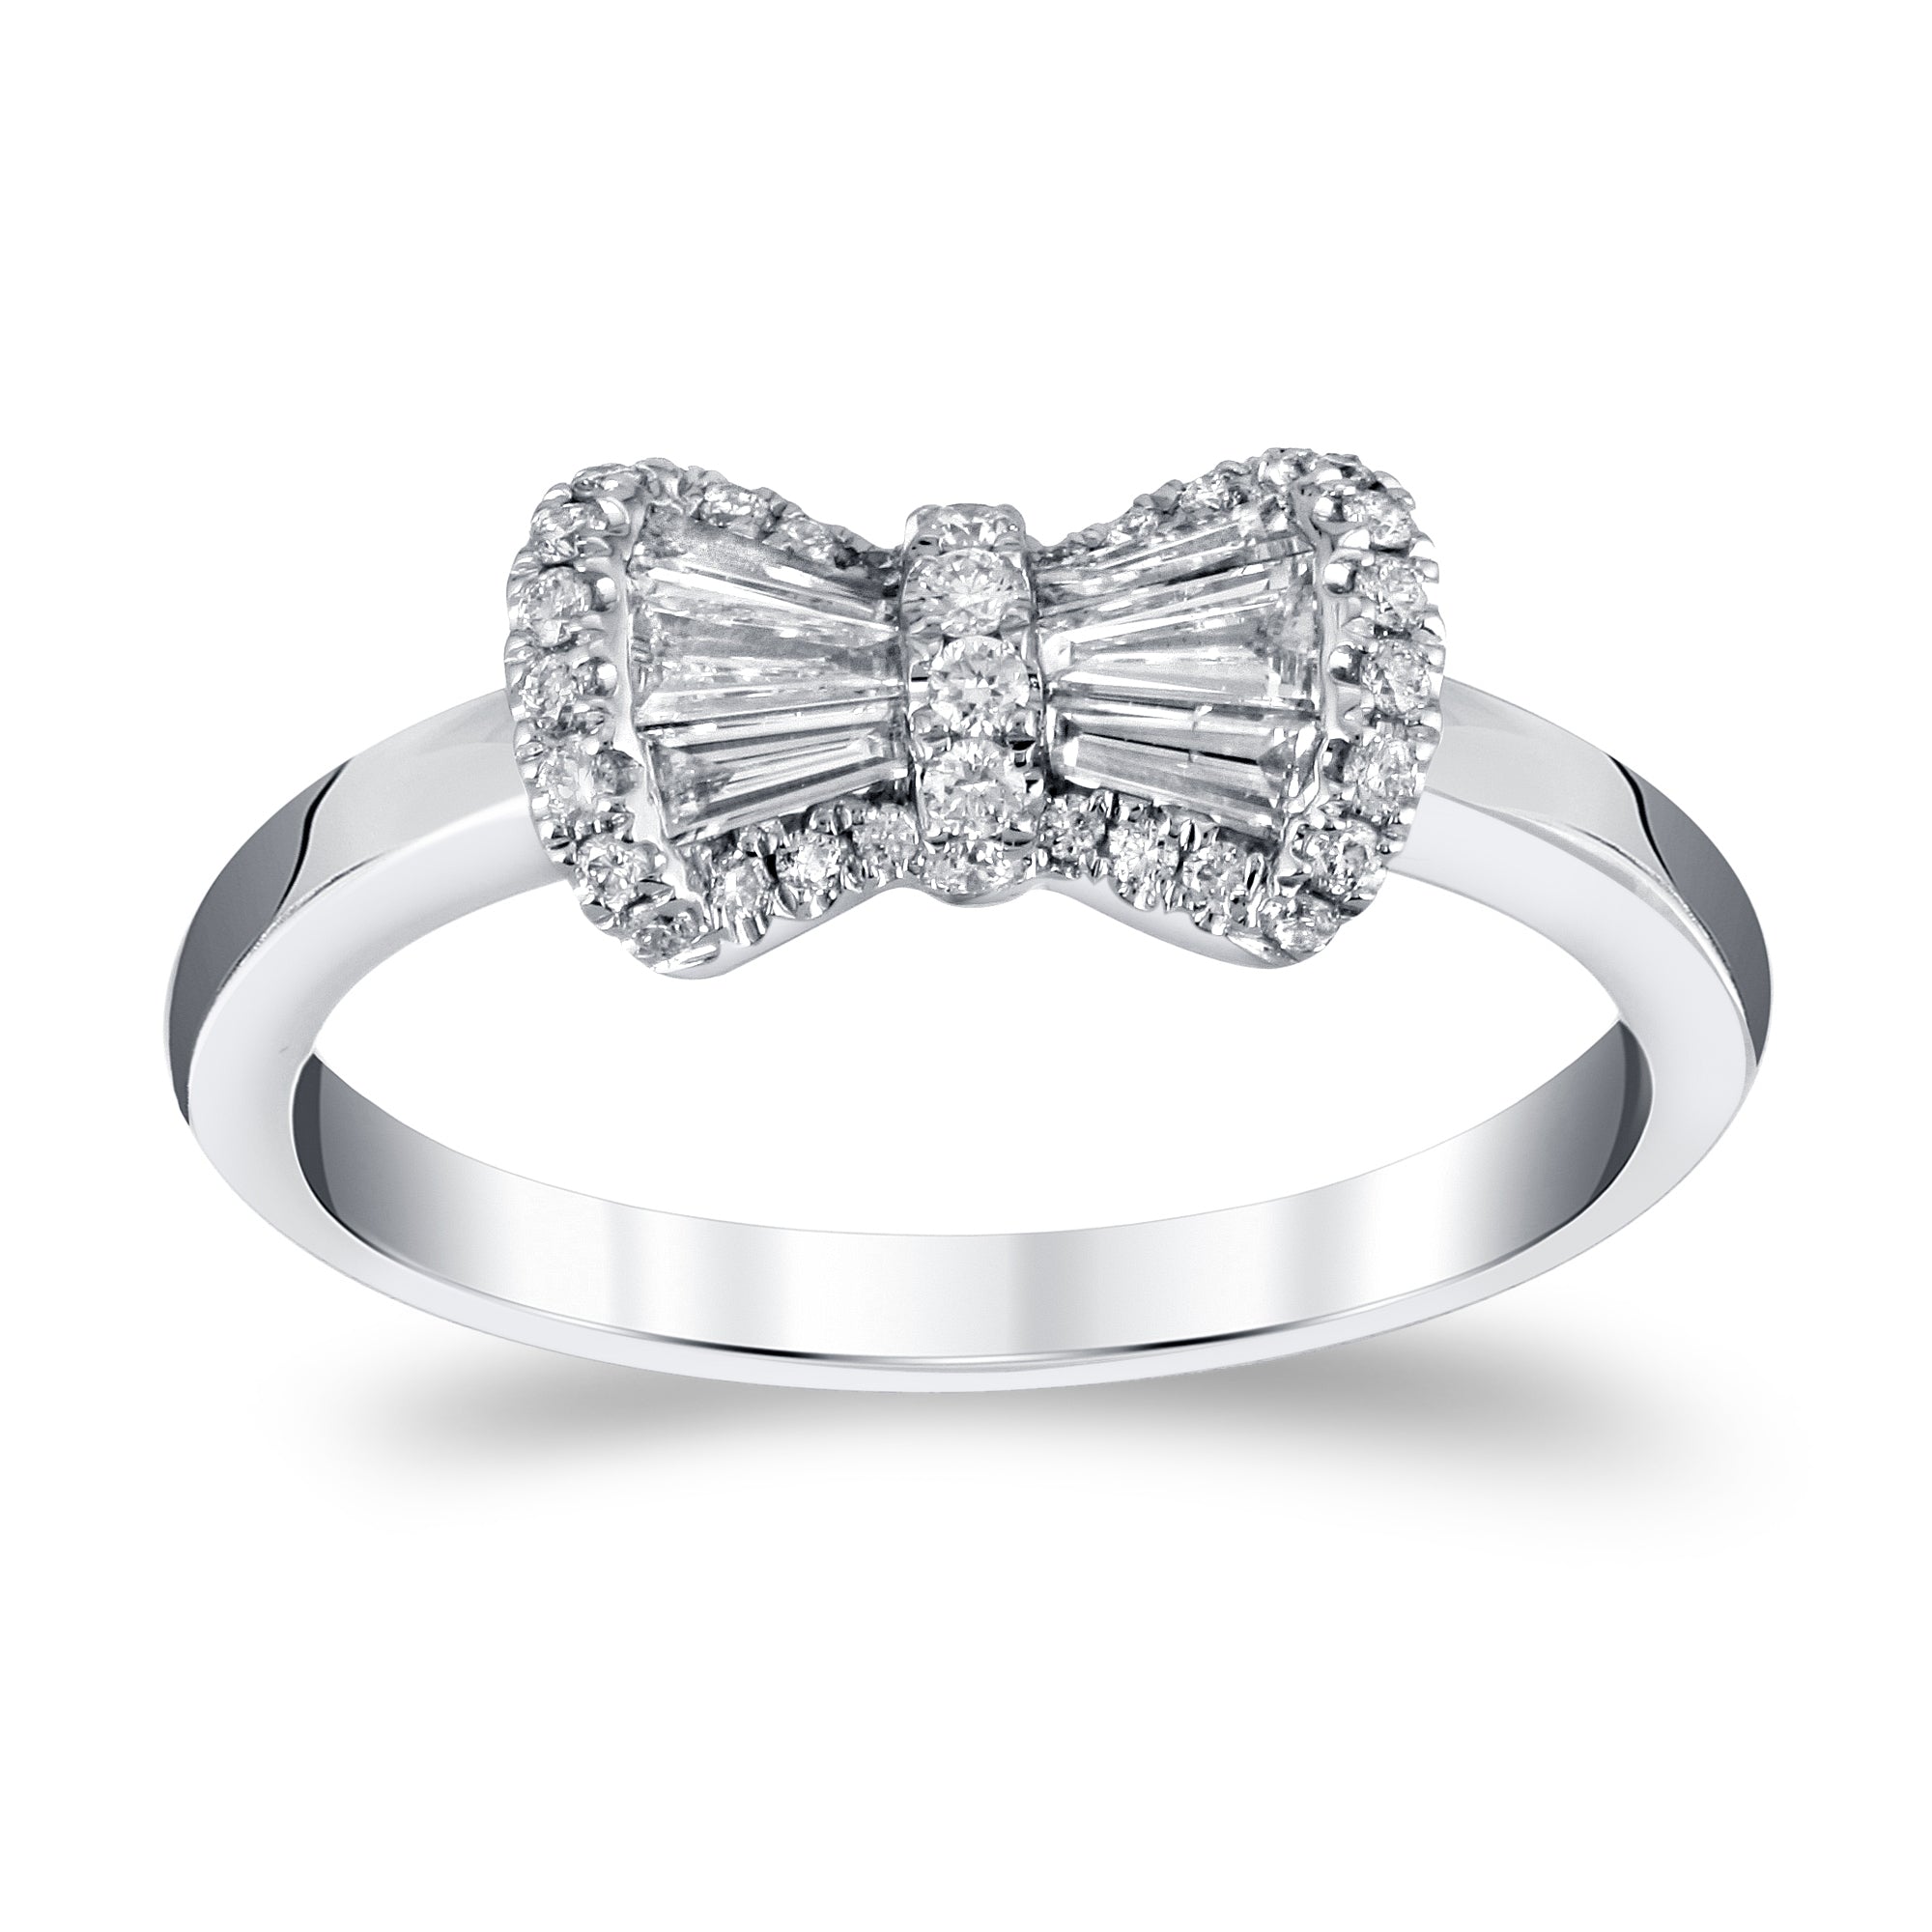 1-1/2 CT. T.W. Diamond Bow Tie Engagement Ring in 14K White Gold | Zales